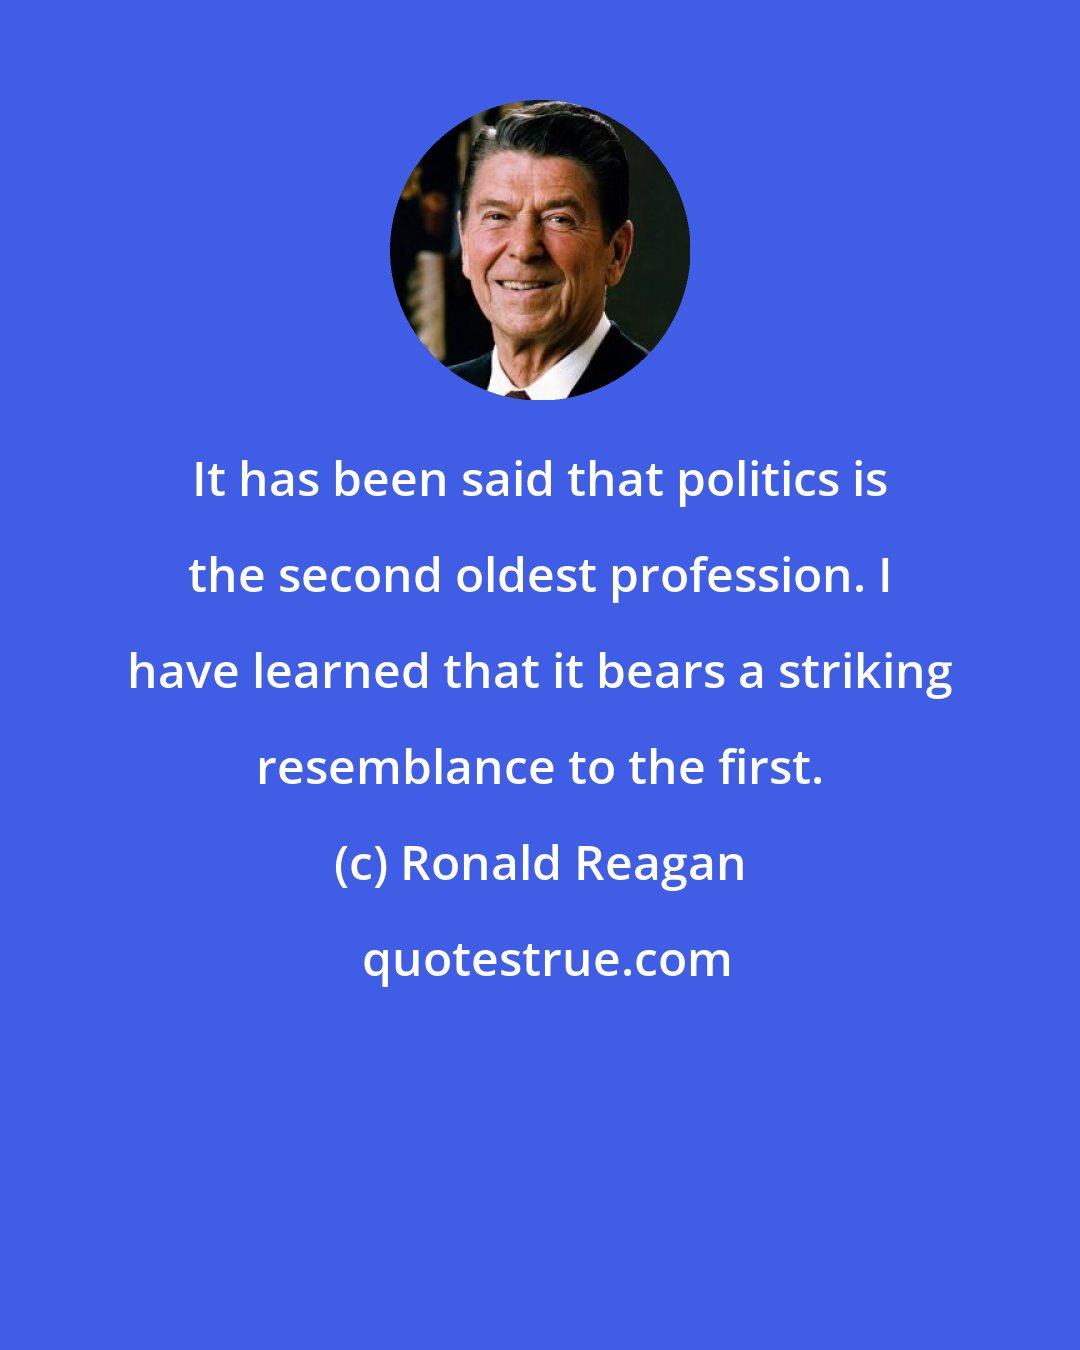 Ronald Reagan: It has been said that politics is the second oldest profession. I have learned that it bears a striking resemblance to the first.